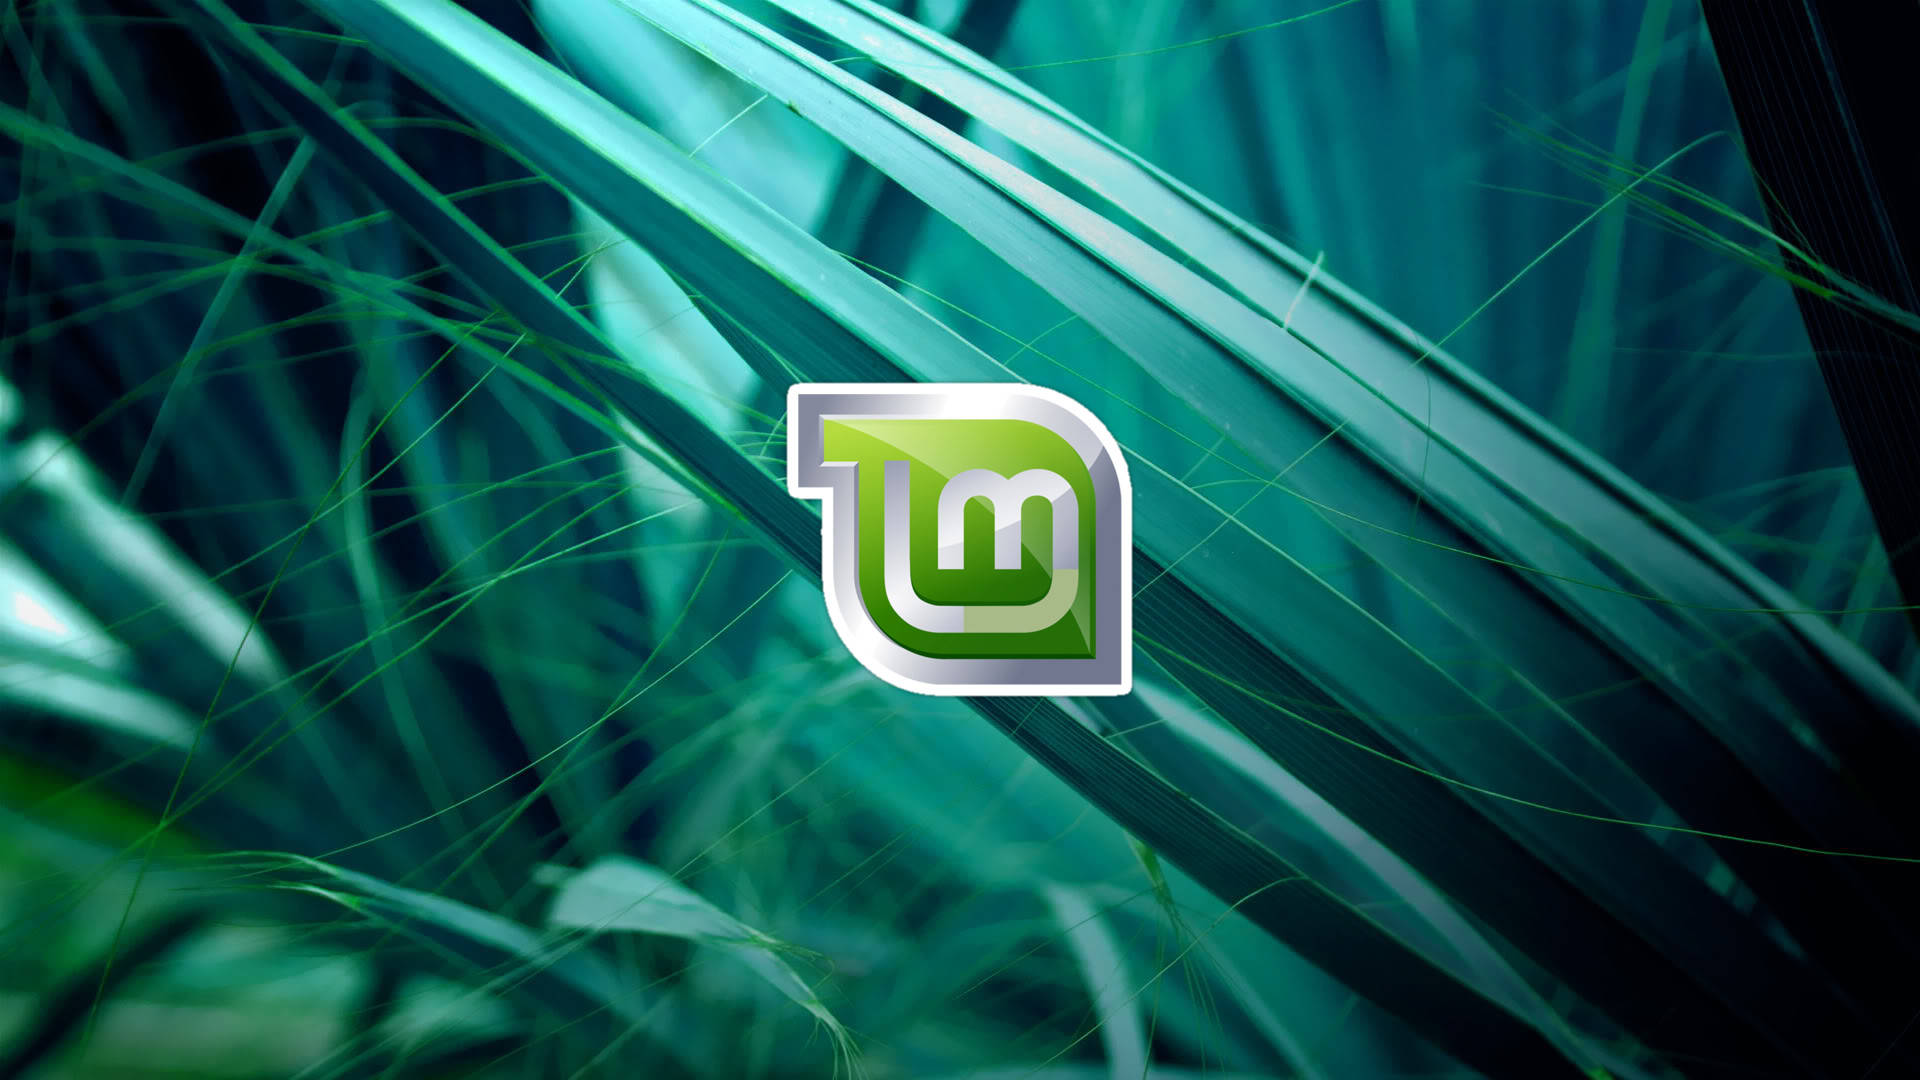 Operating System Linux Mint Logo On Plant Leaves Background